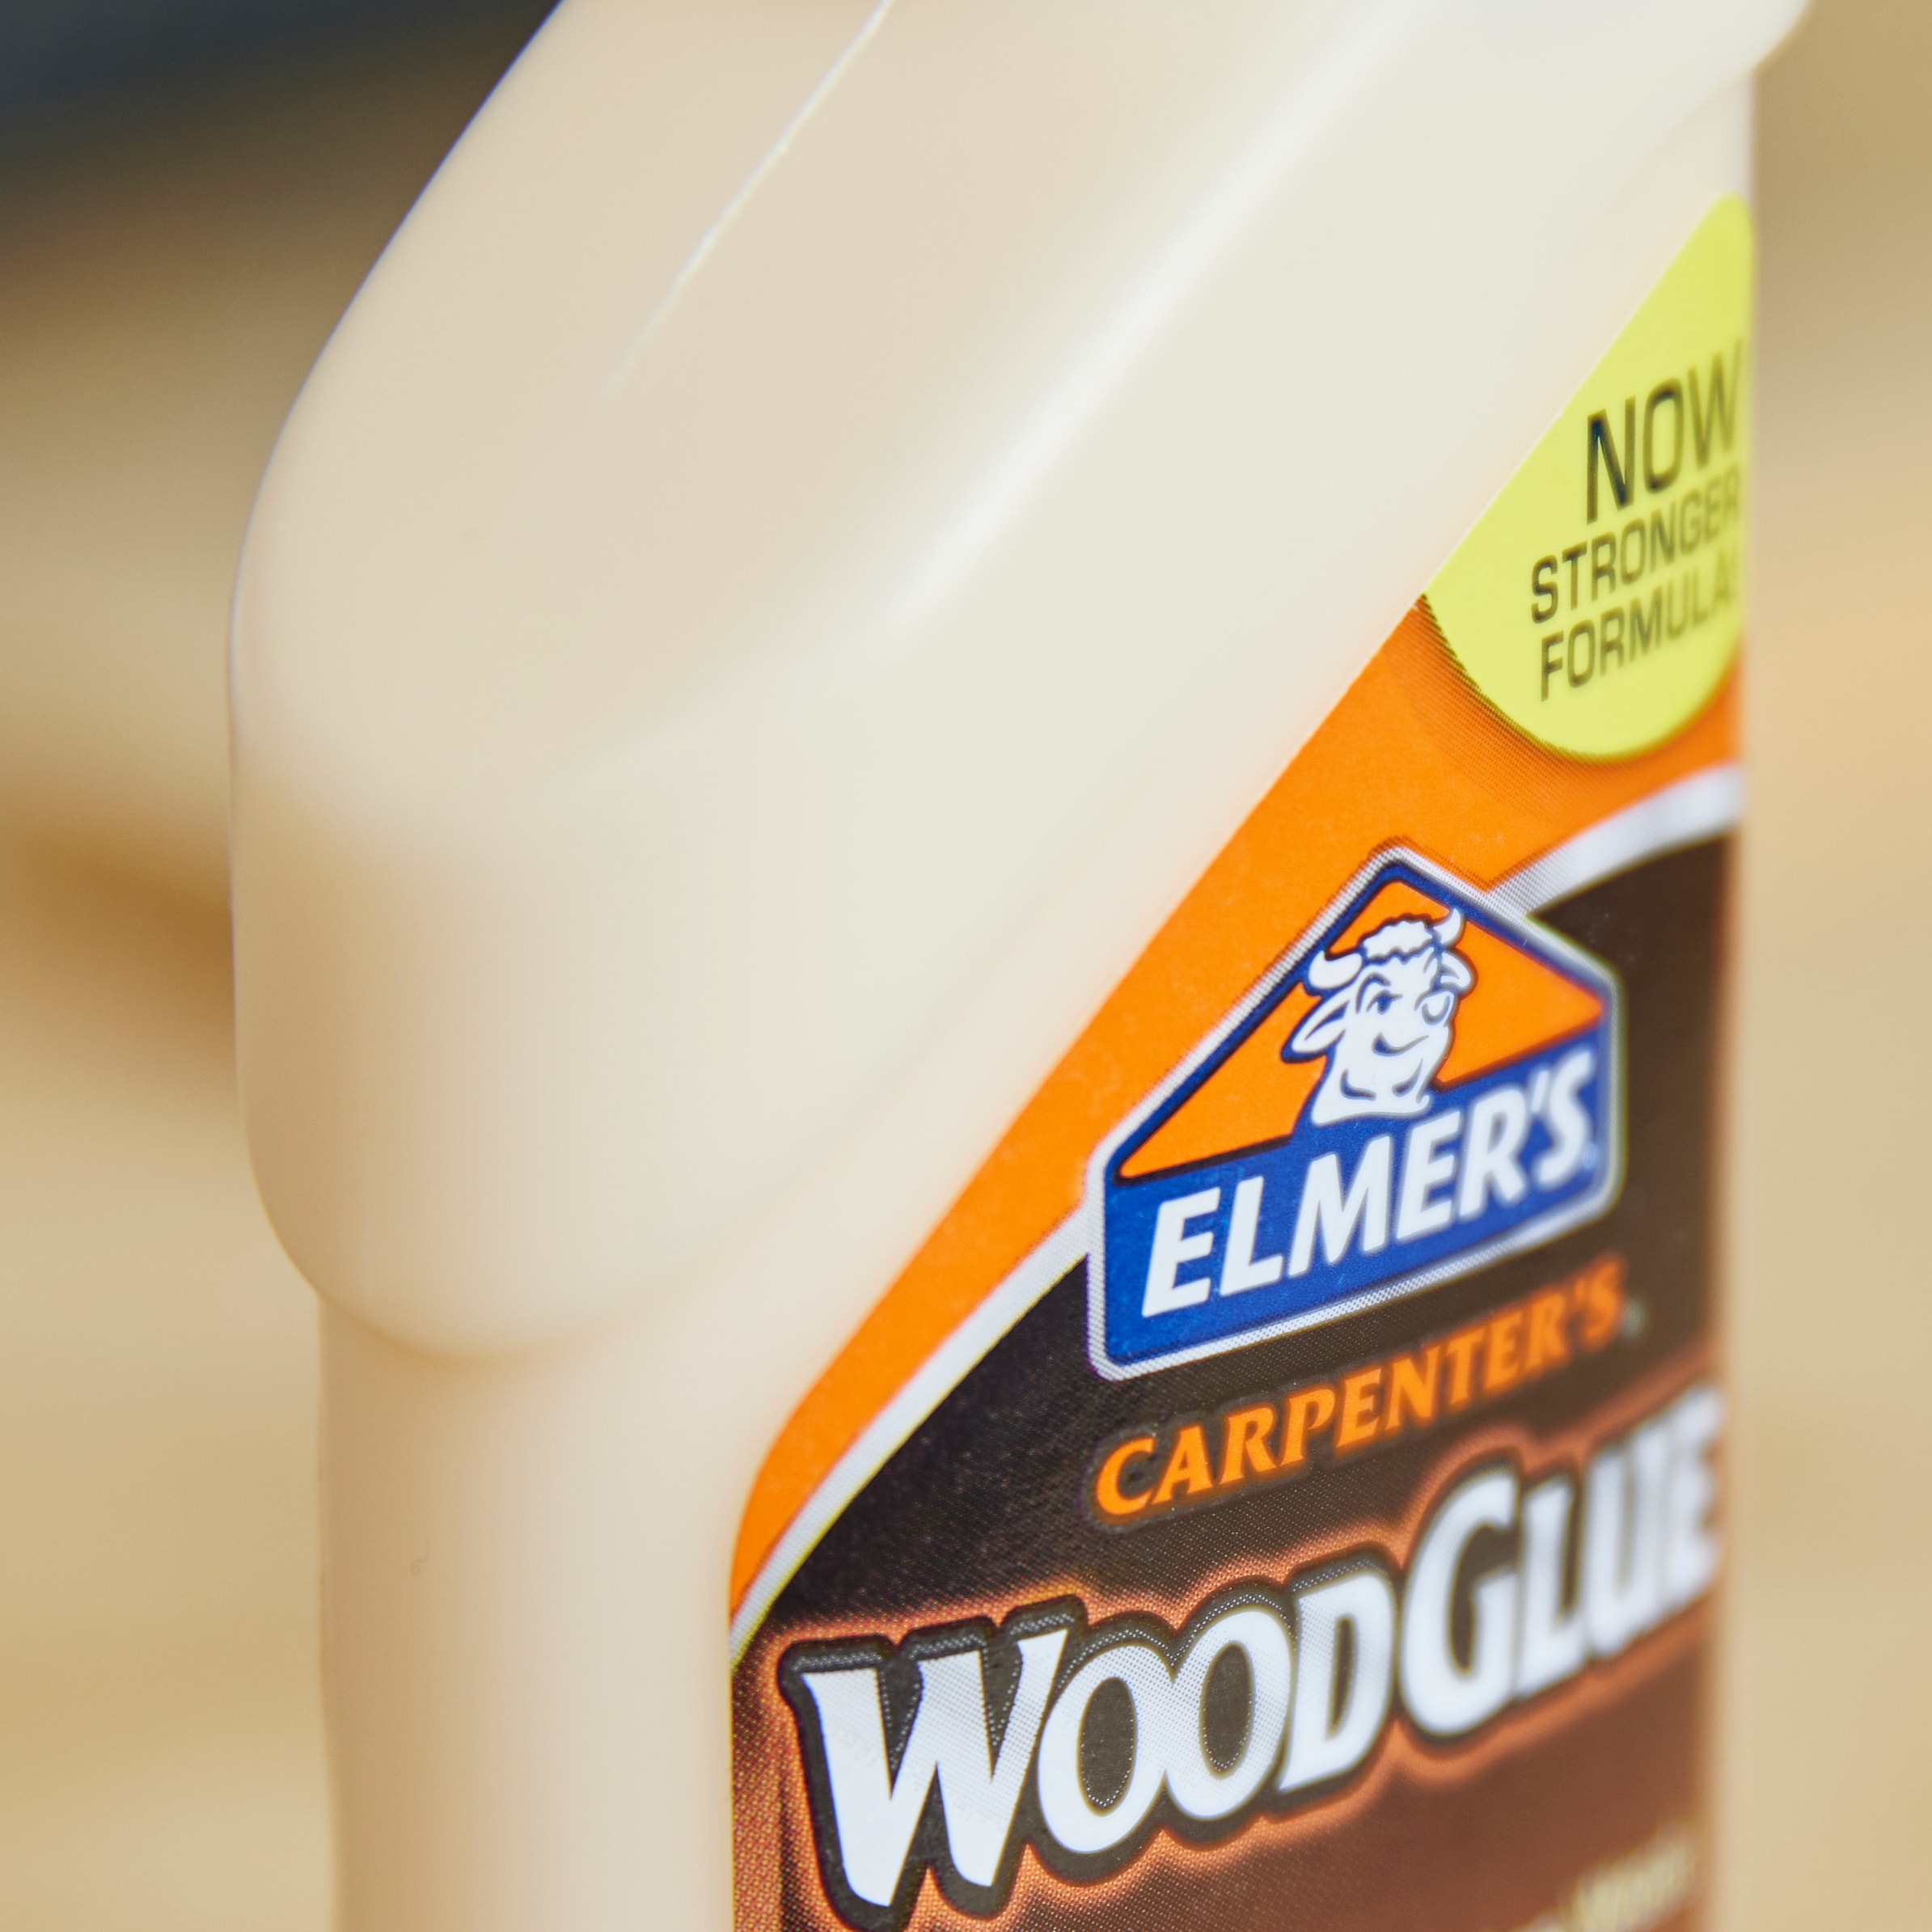 Procure Plus - Elmer's Carpenter's Wood Glue off-white wood adhesive is  great for interior projects! It bonds stronger than wood itself and is  great for carpentry and furniture repairs! #elmers #elmersglue  #procuremaldives #